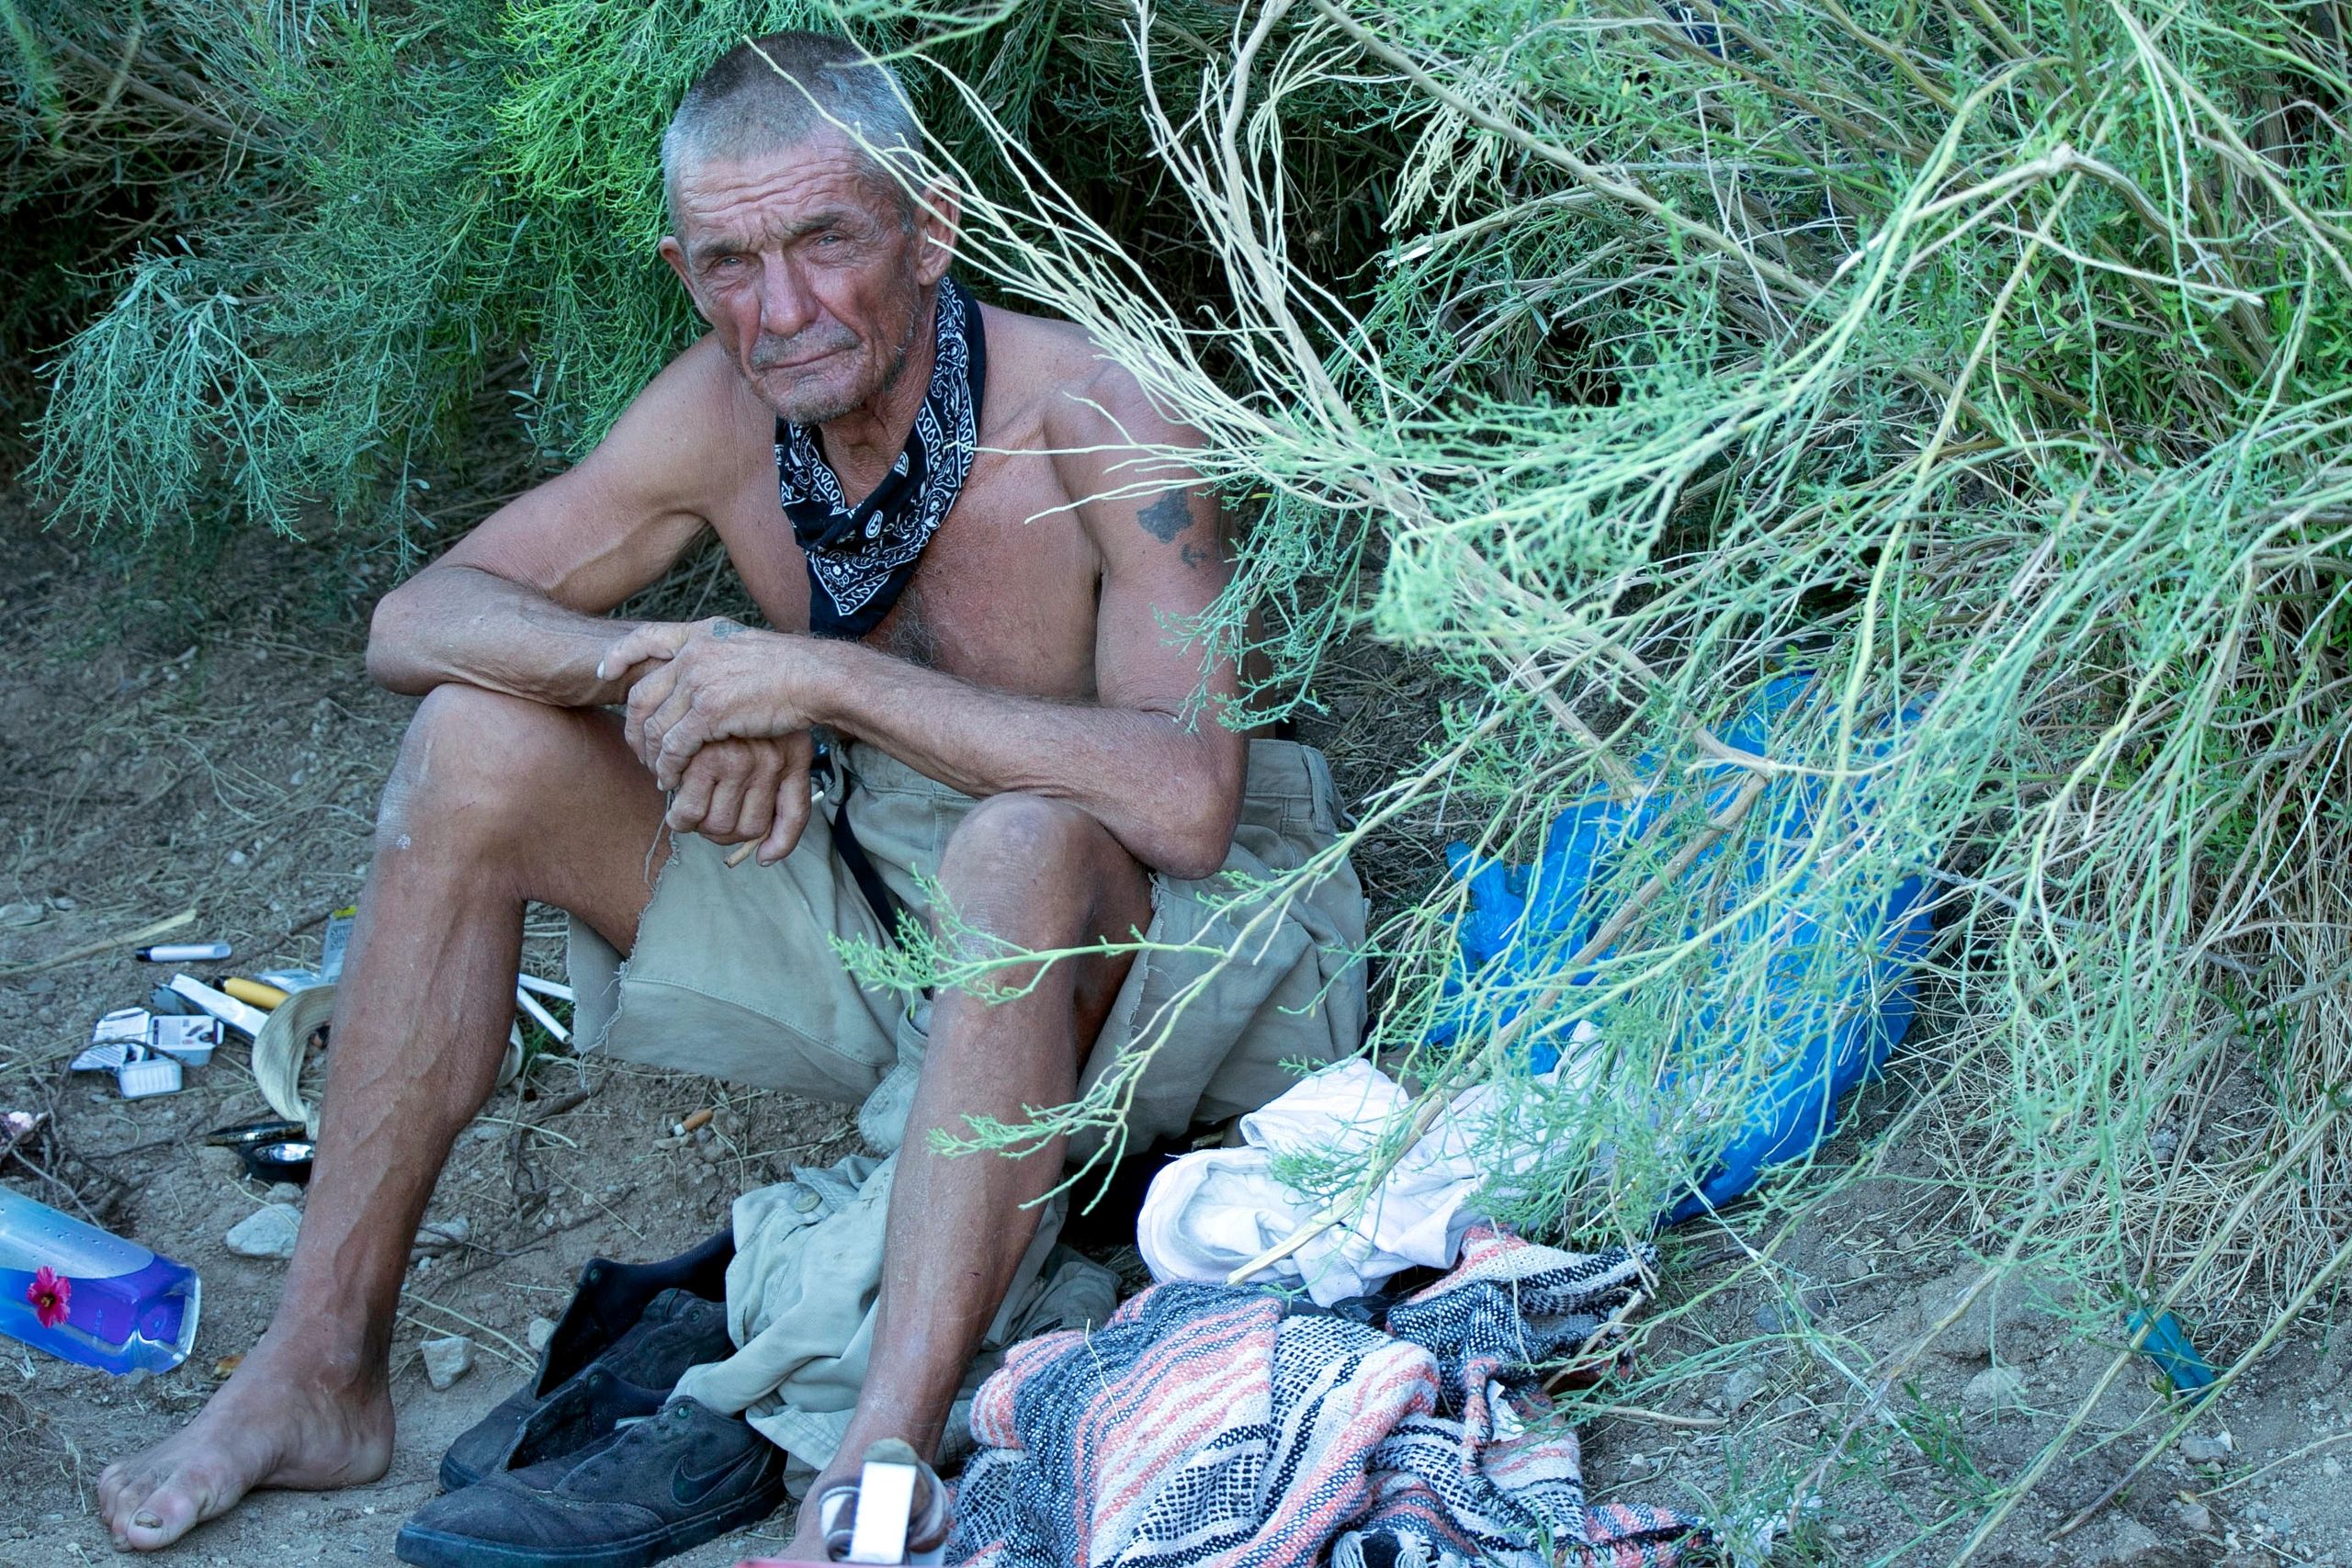 Elderly homeless man waits out the mid-day desert sun in the shade of an offramp landscaping bush.